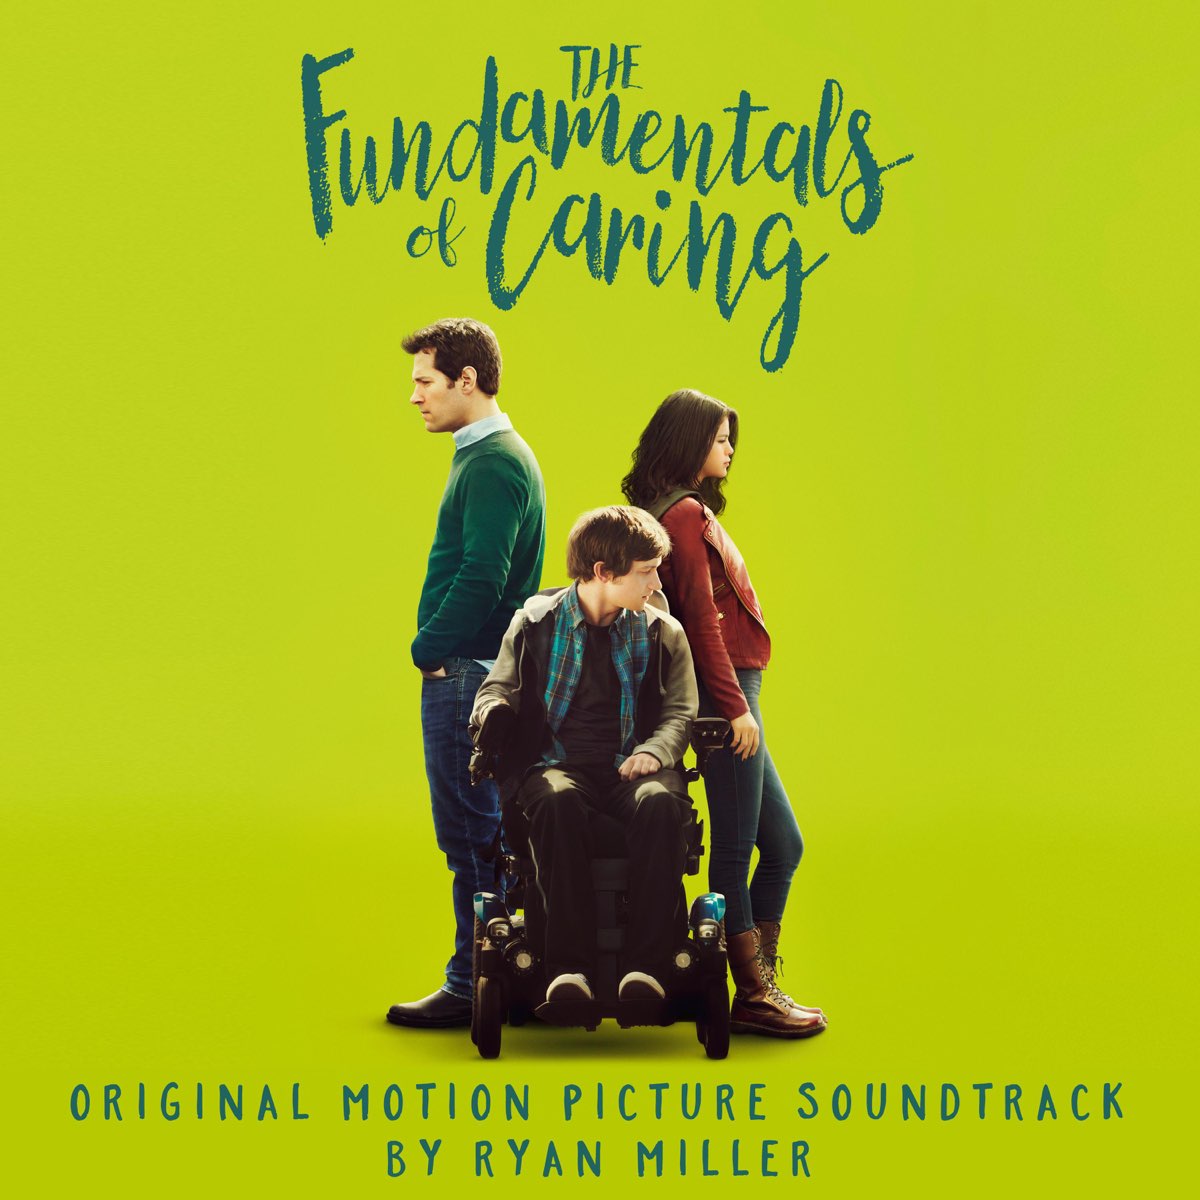 The Fundamentals of Caring (Original Motion Picture Soundtrack) - Album by  Ryan Miller - Apple Music